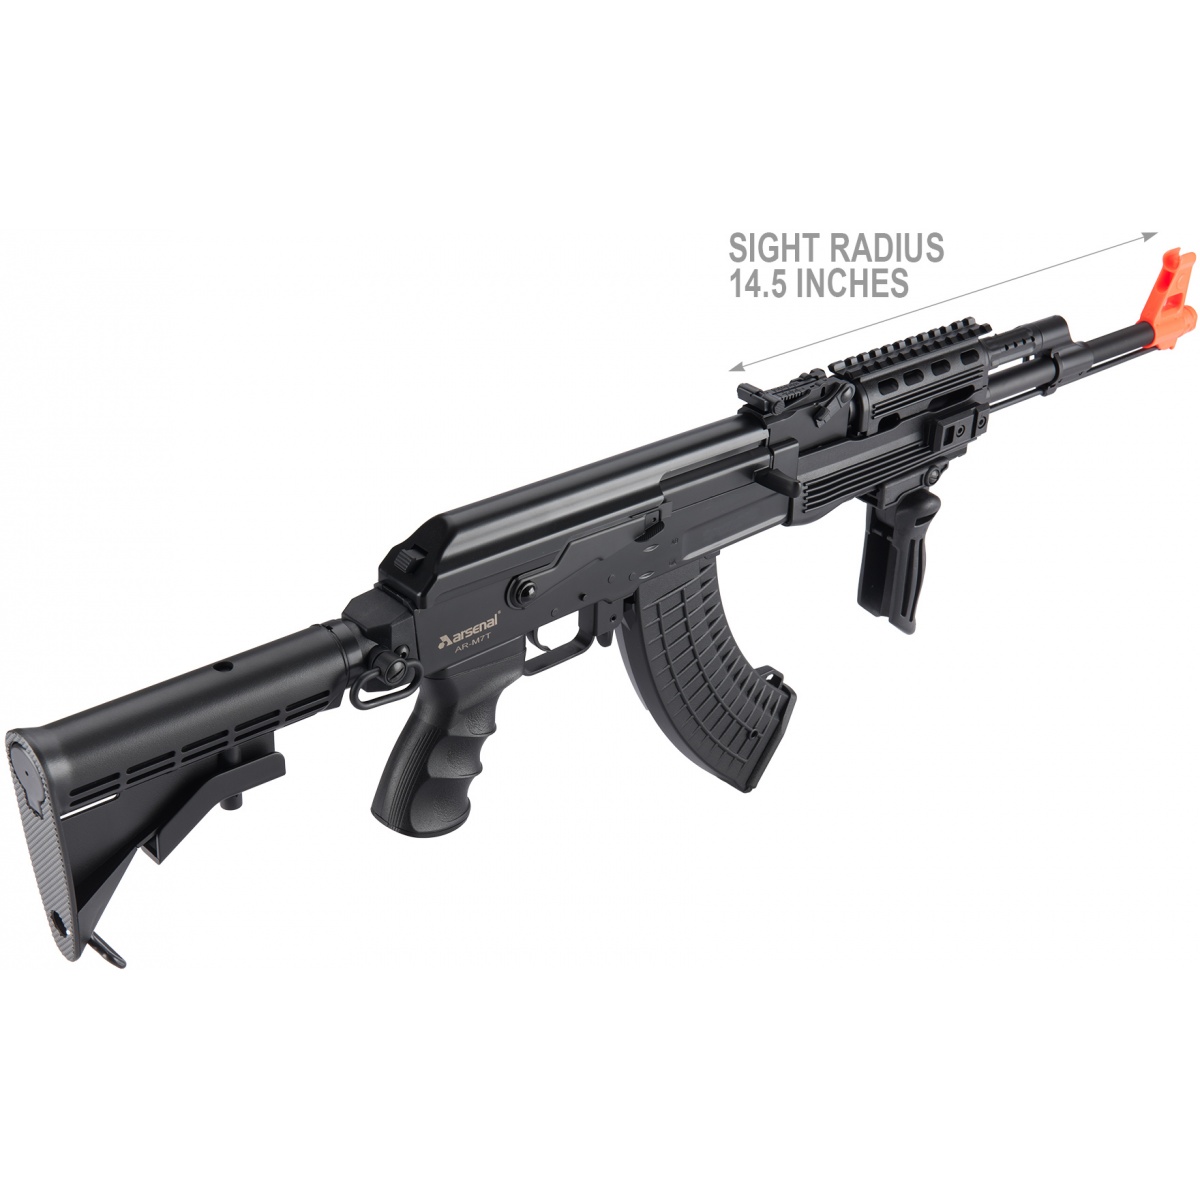 AFG/T1C] Russian AKS-74U Low Power Airsoft Assault Rifle (Spring Powered) –  707 ARSENAL